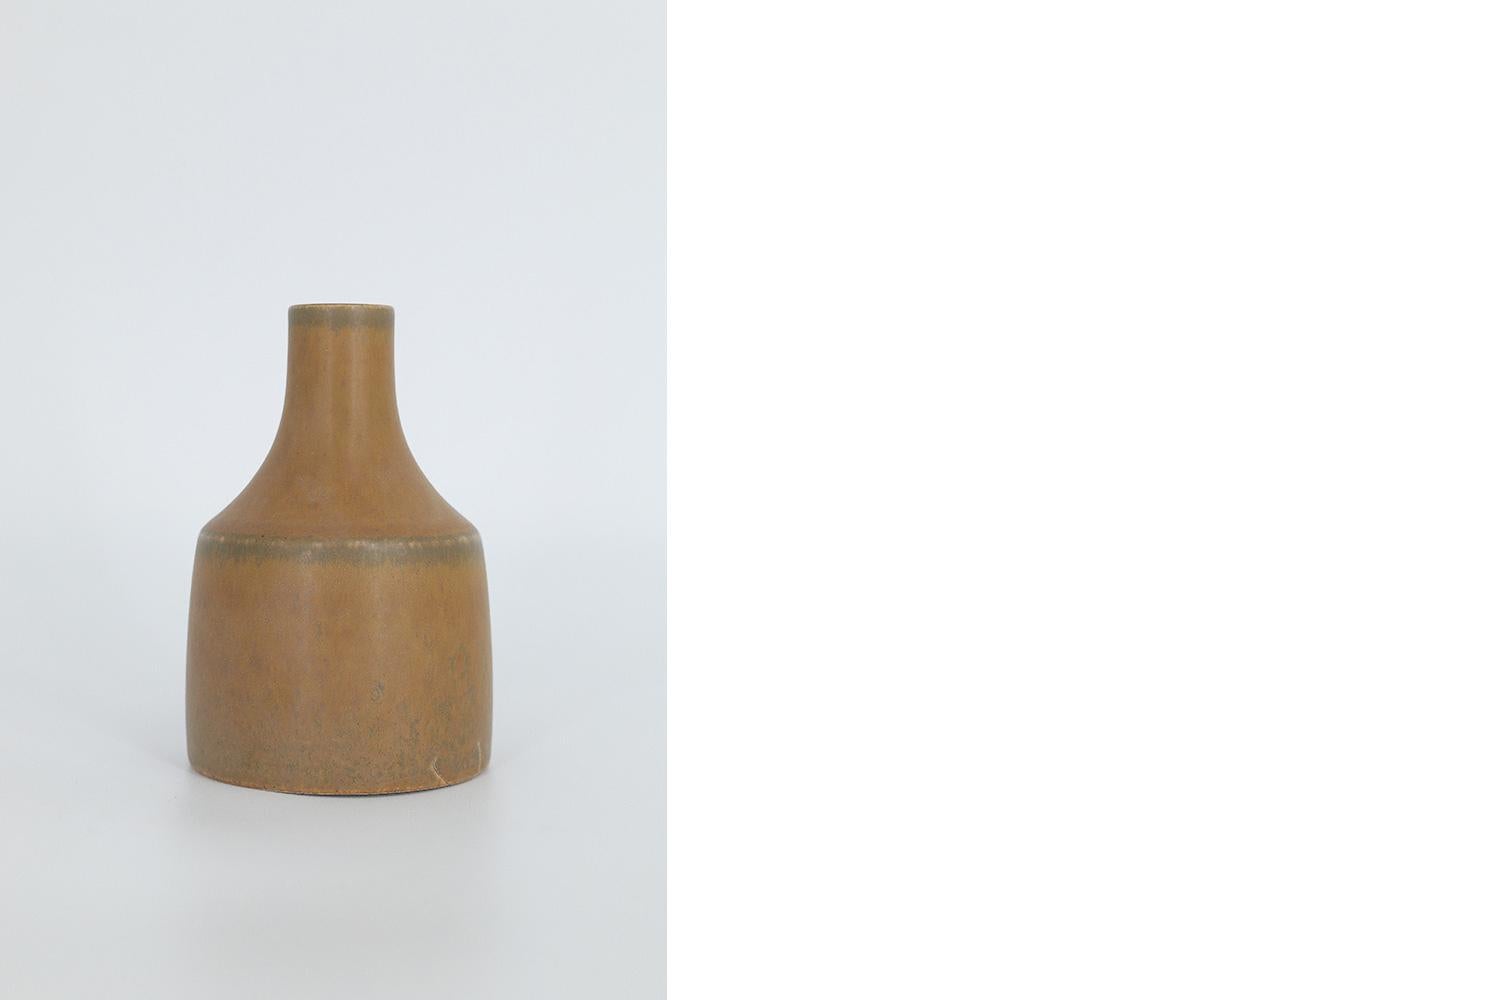 This miniature, collectible stoneware vase was designed by Gunnar Borg for the Swedish manufacture Höganäs Keramik during the 1960s. Handmade by a Master, with the utmost care and attention to details. The caramel colored vase with an irregular